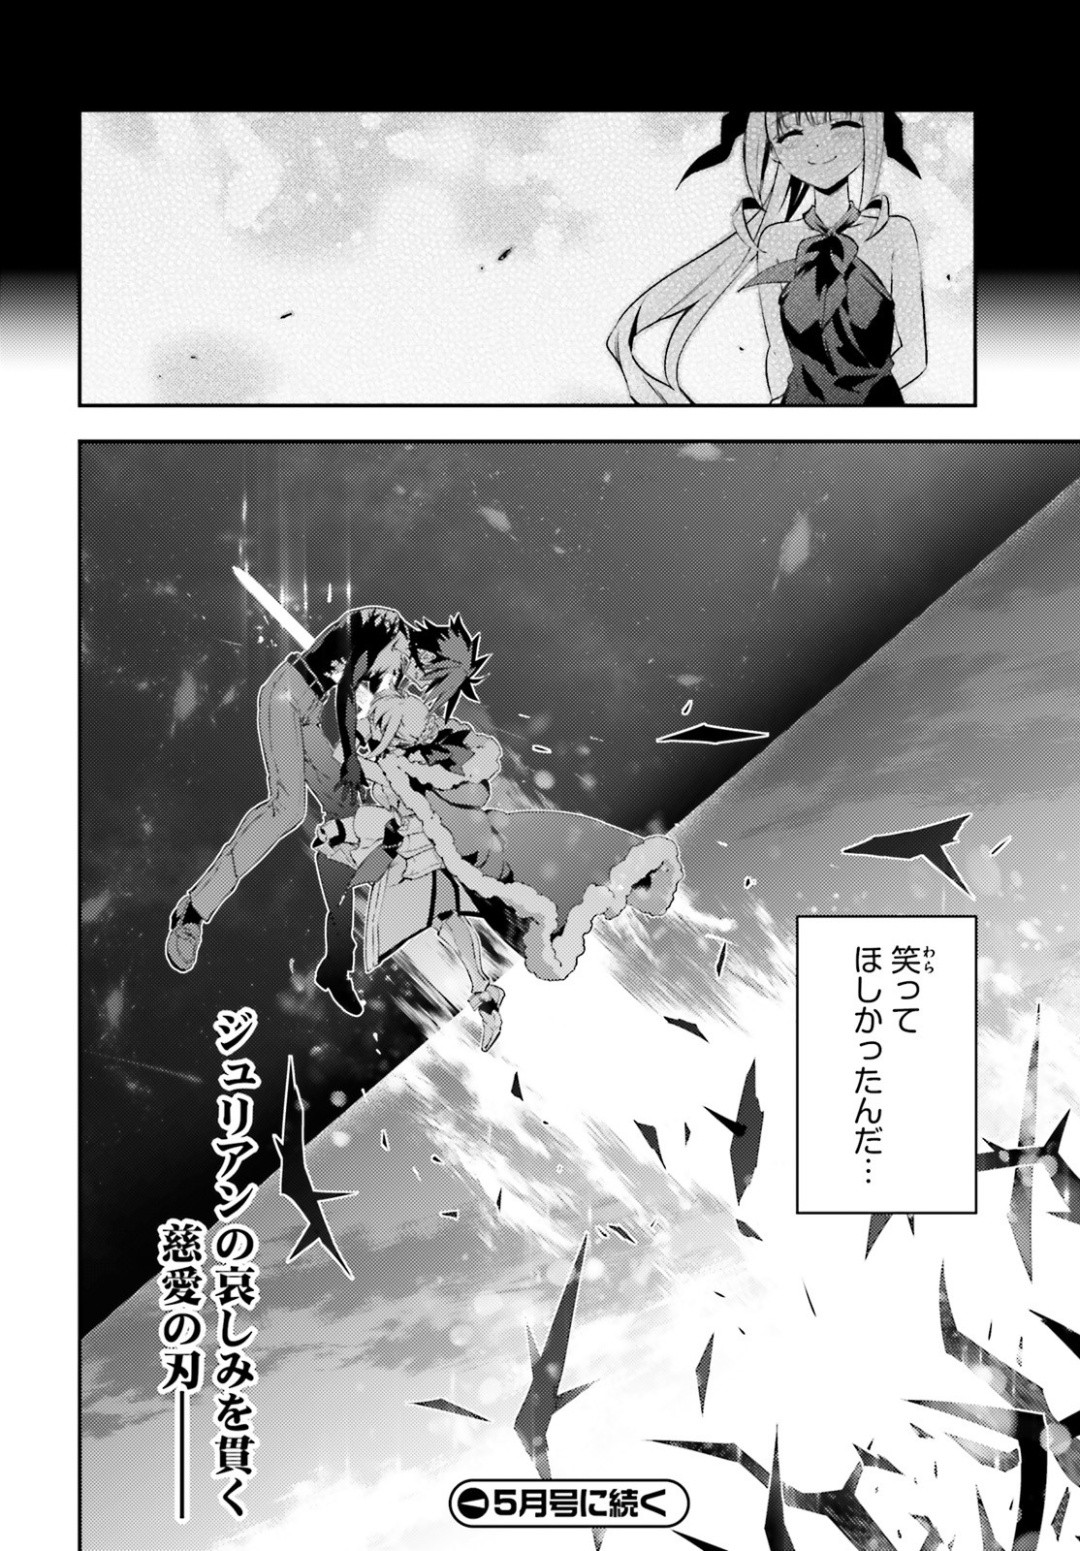 Fate/Kaleid Liner Prisma Illya Drei! - Chapter 56-2 - Page 16